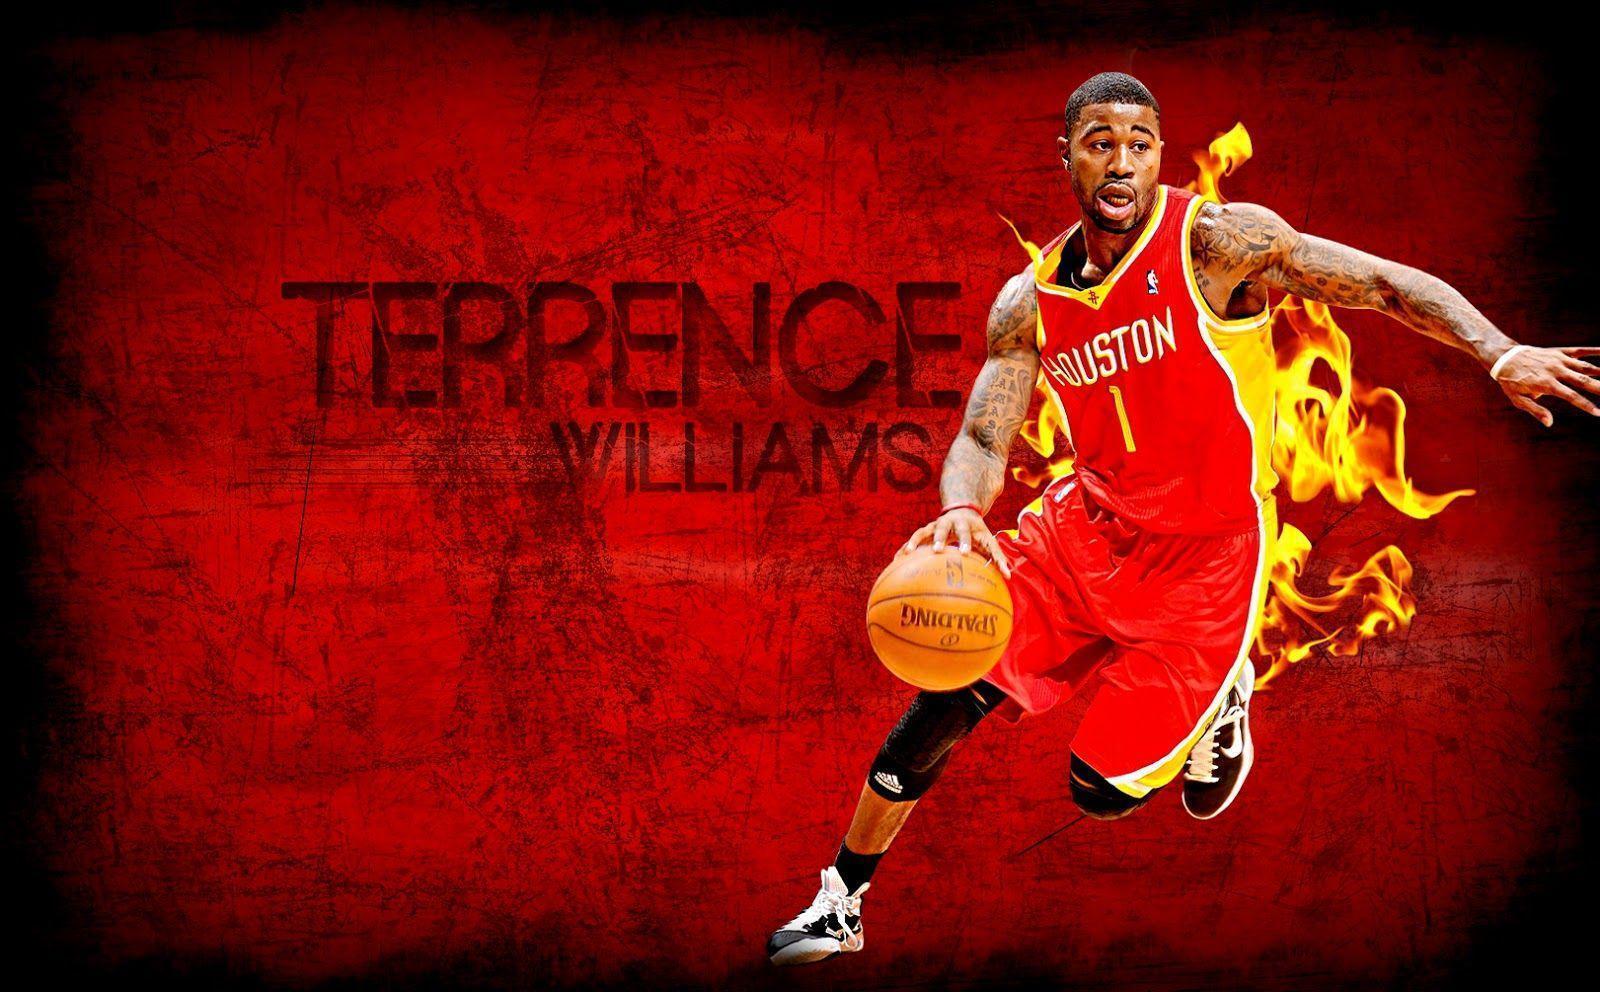 Terrence Williams Basketball Player Latest HD Wallpaper 2013